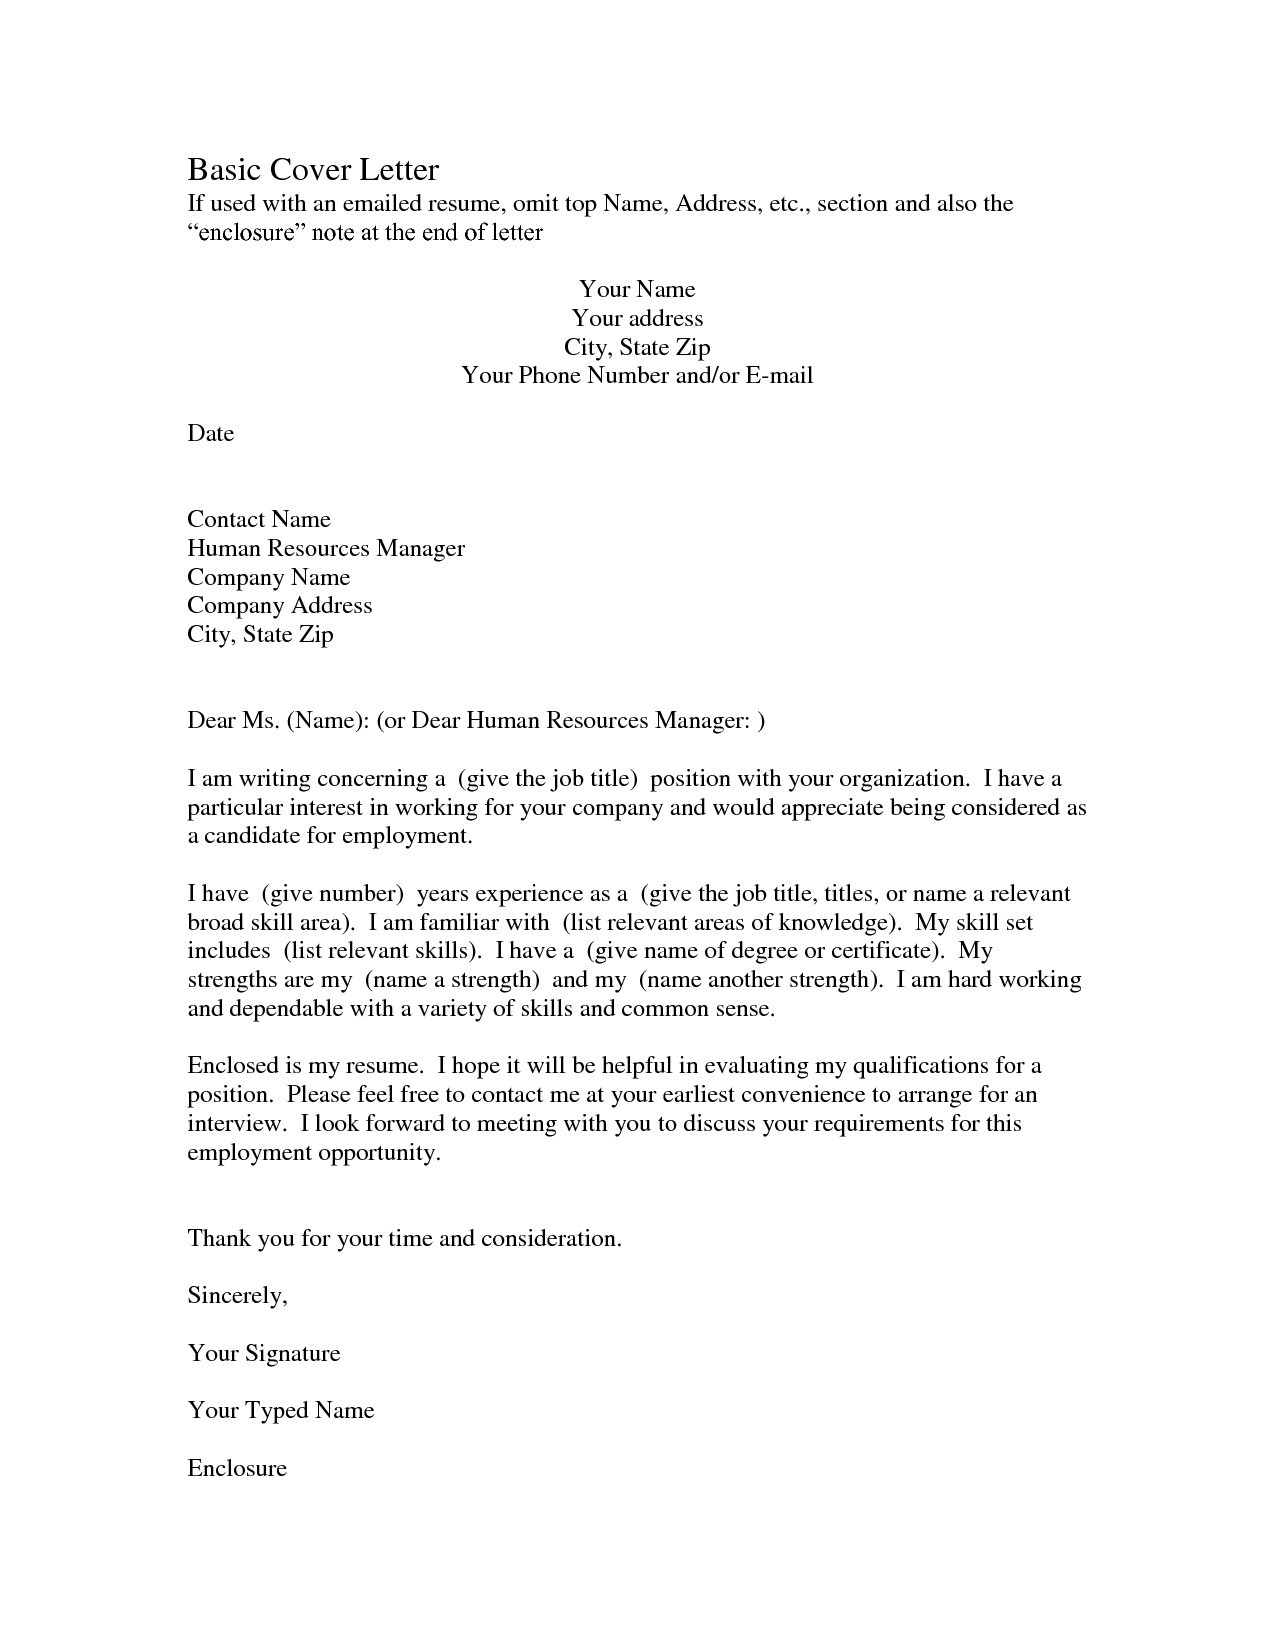 Easy Cover Letter Template - Free Resume Cover Letter format S